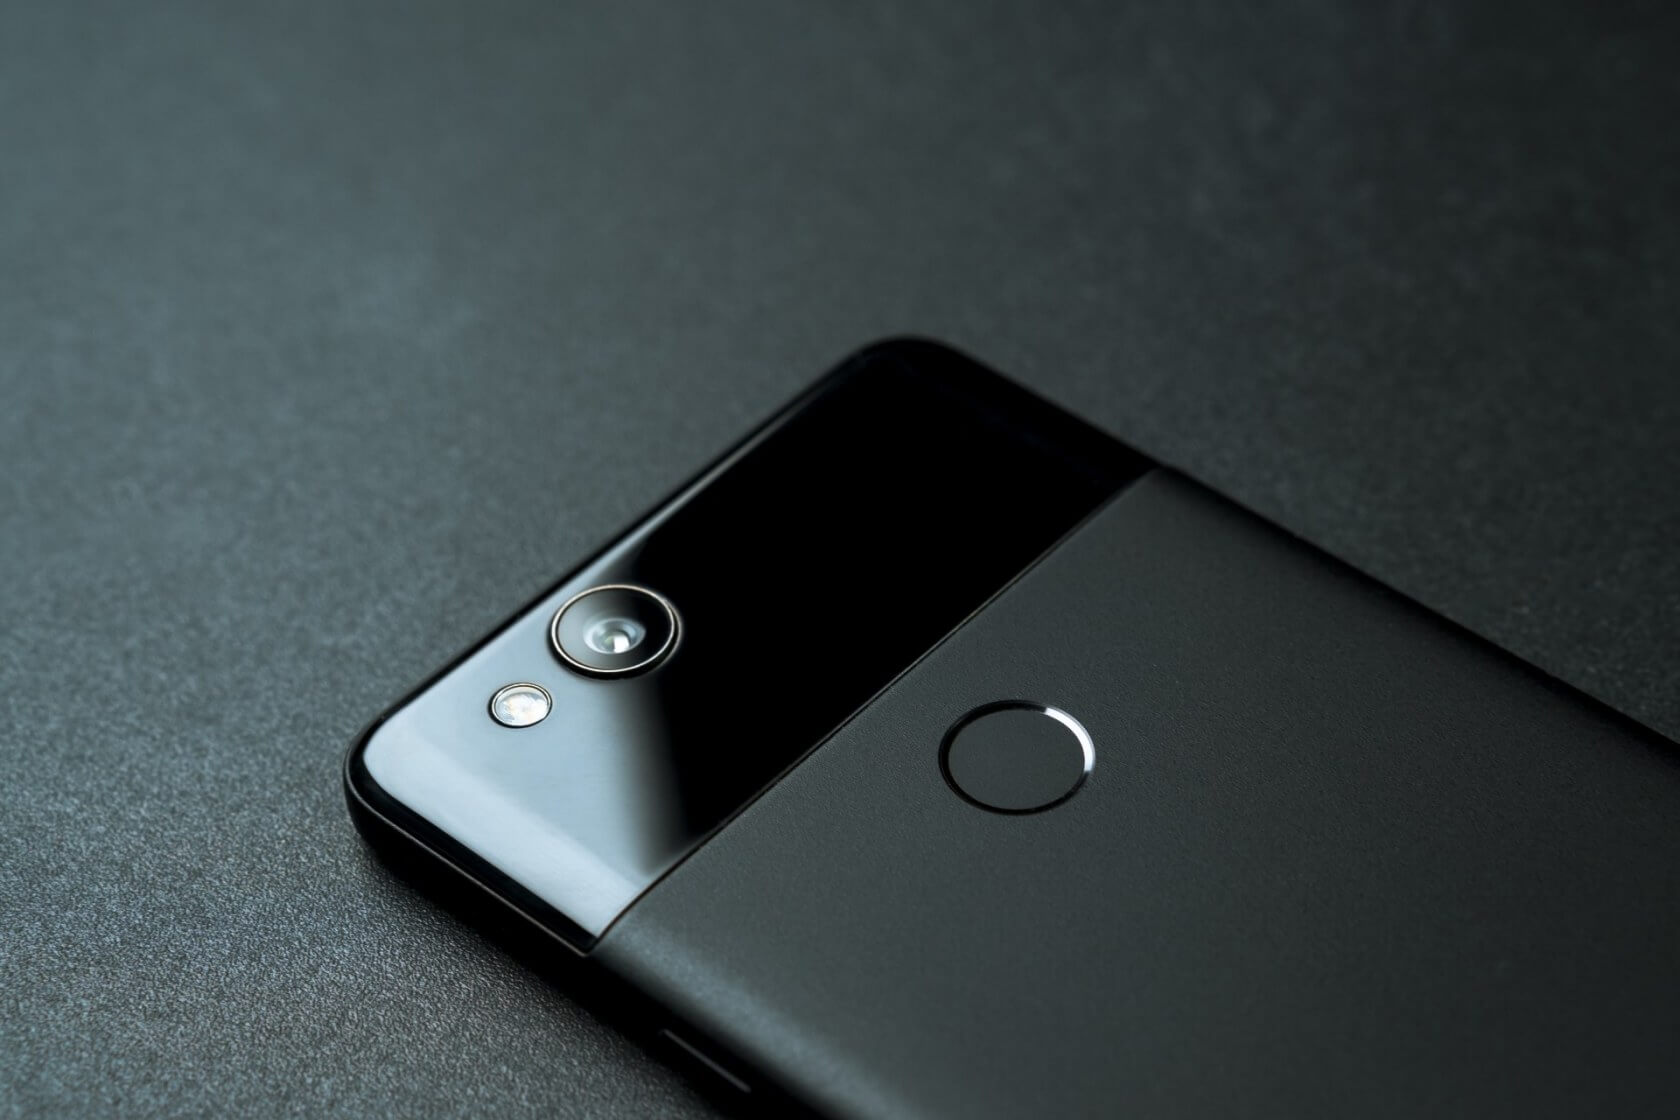 Google ends official support for the original Pixel 1 phone